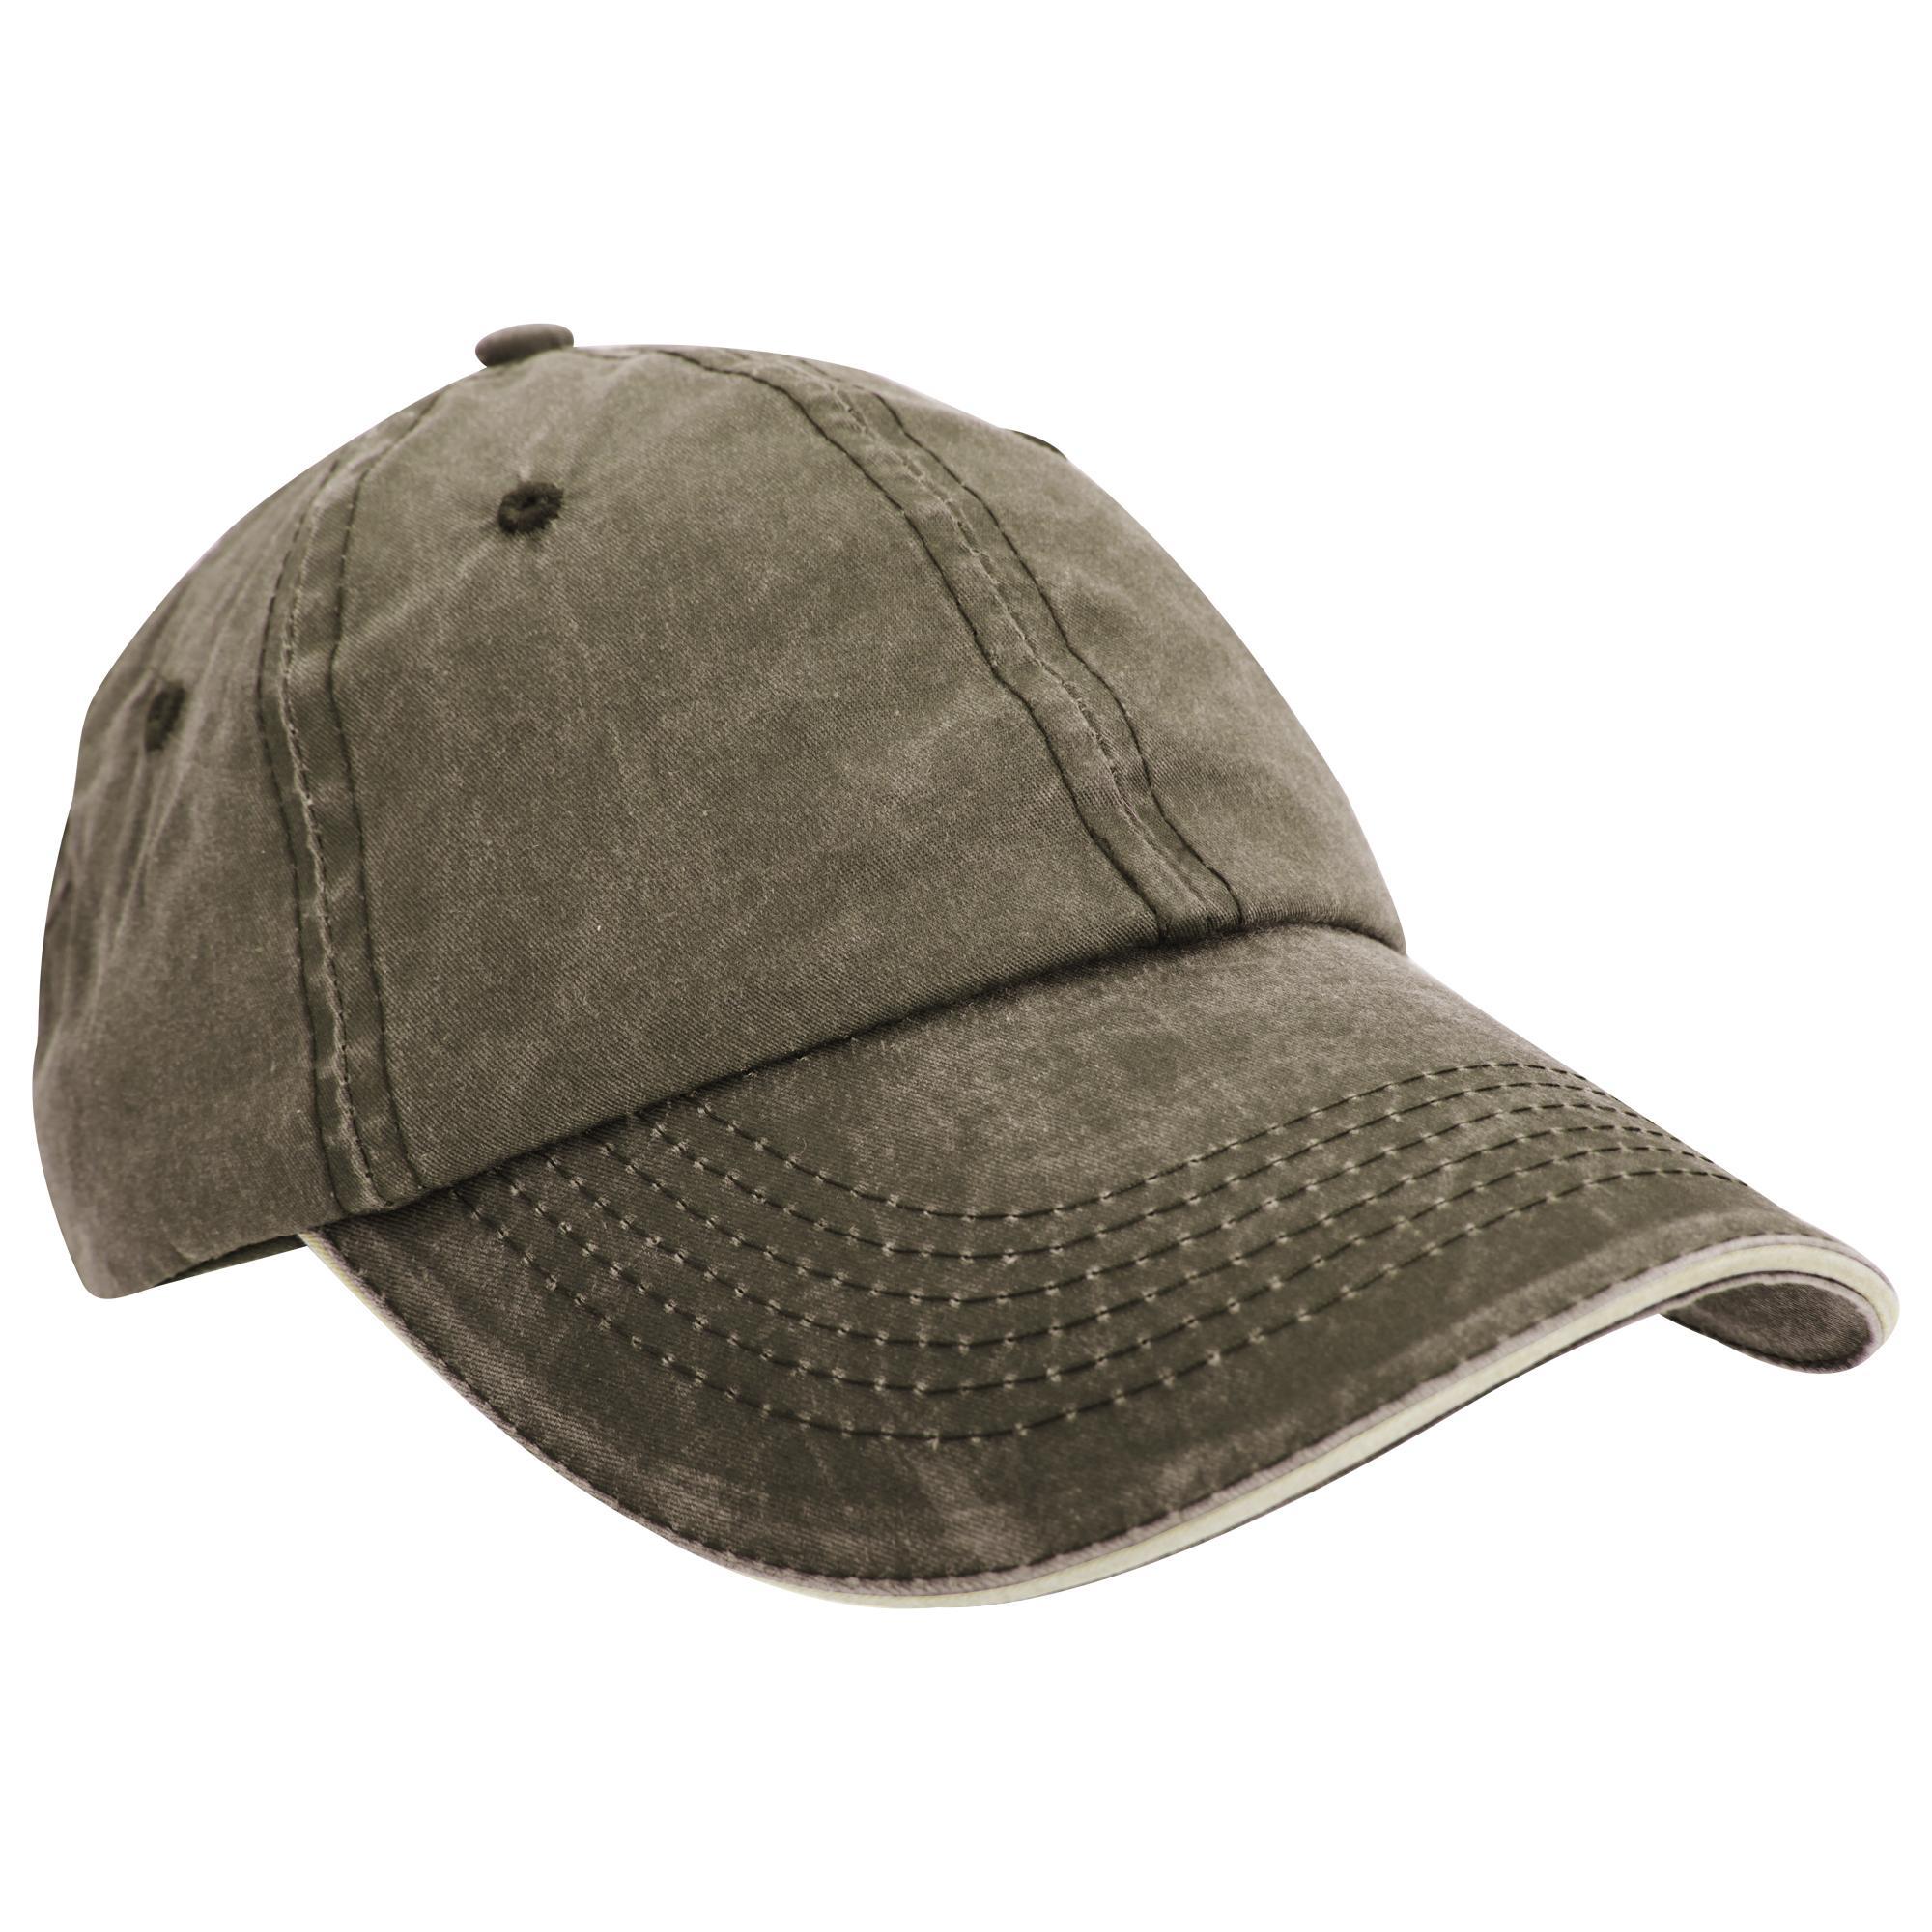 Result Washed Fine Line Cotton Baseball Cap With Sandwich Peak (Olive/Stone) (One Size)